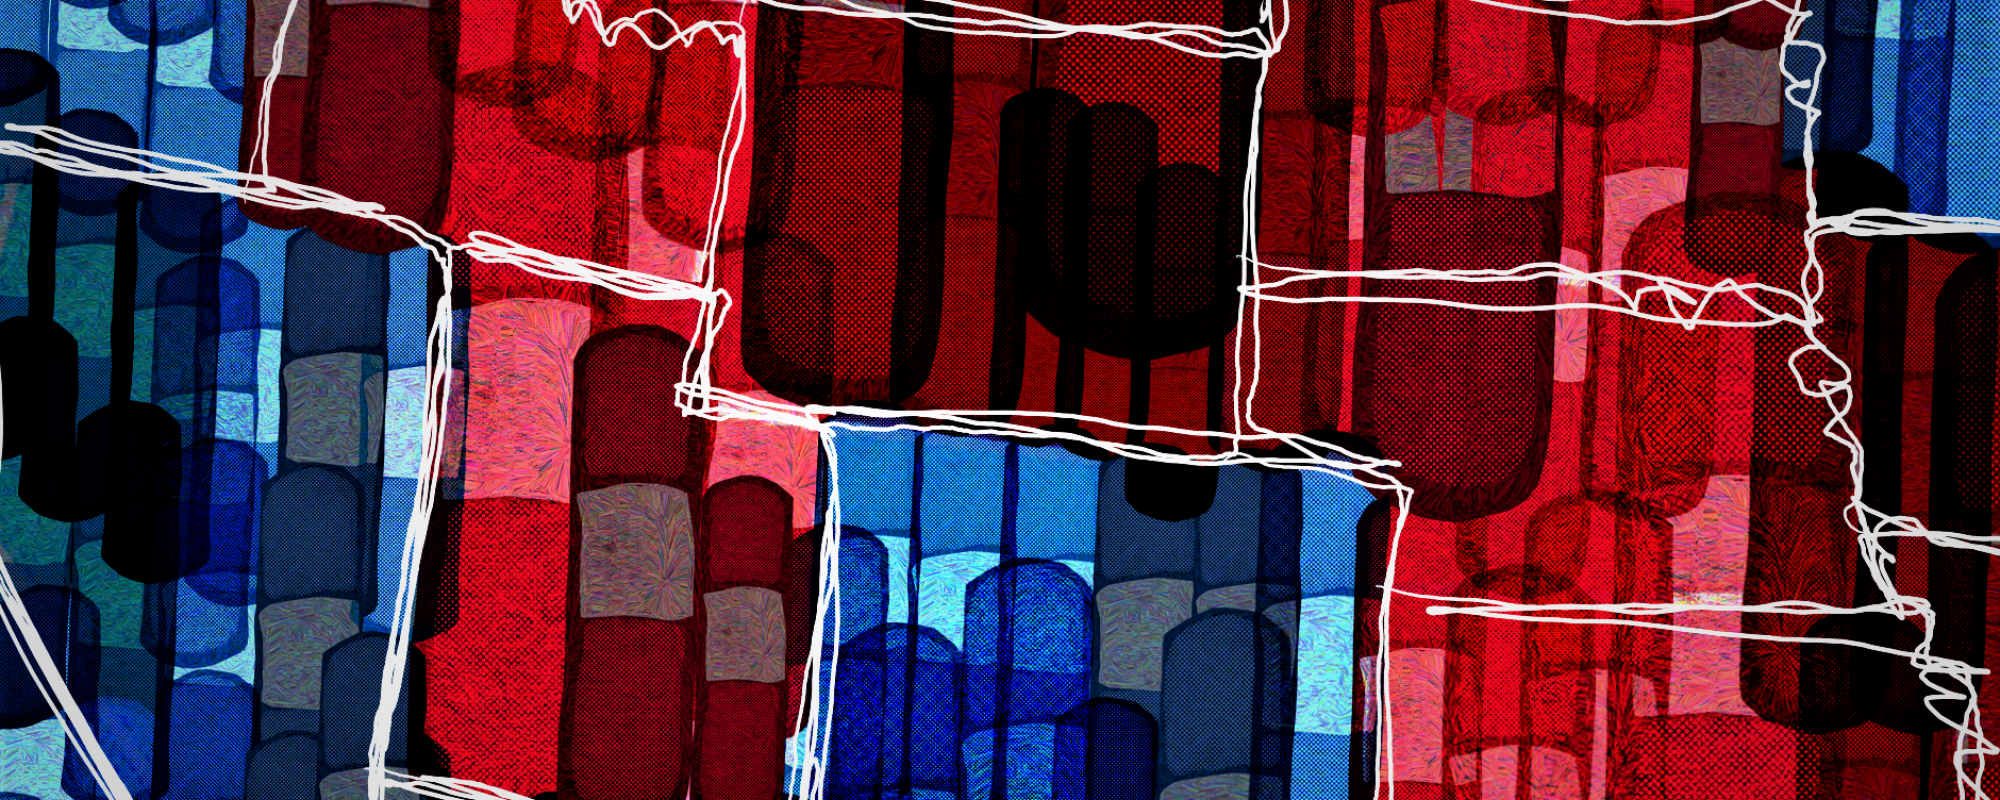 blue and red grid-like pattern